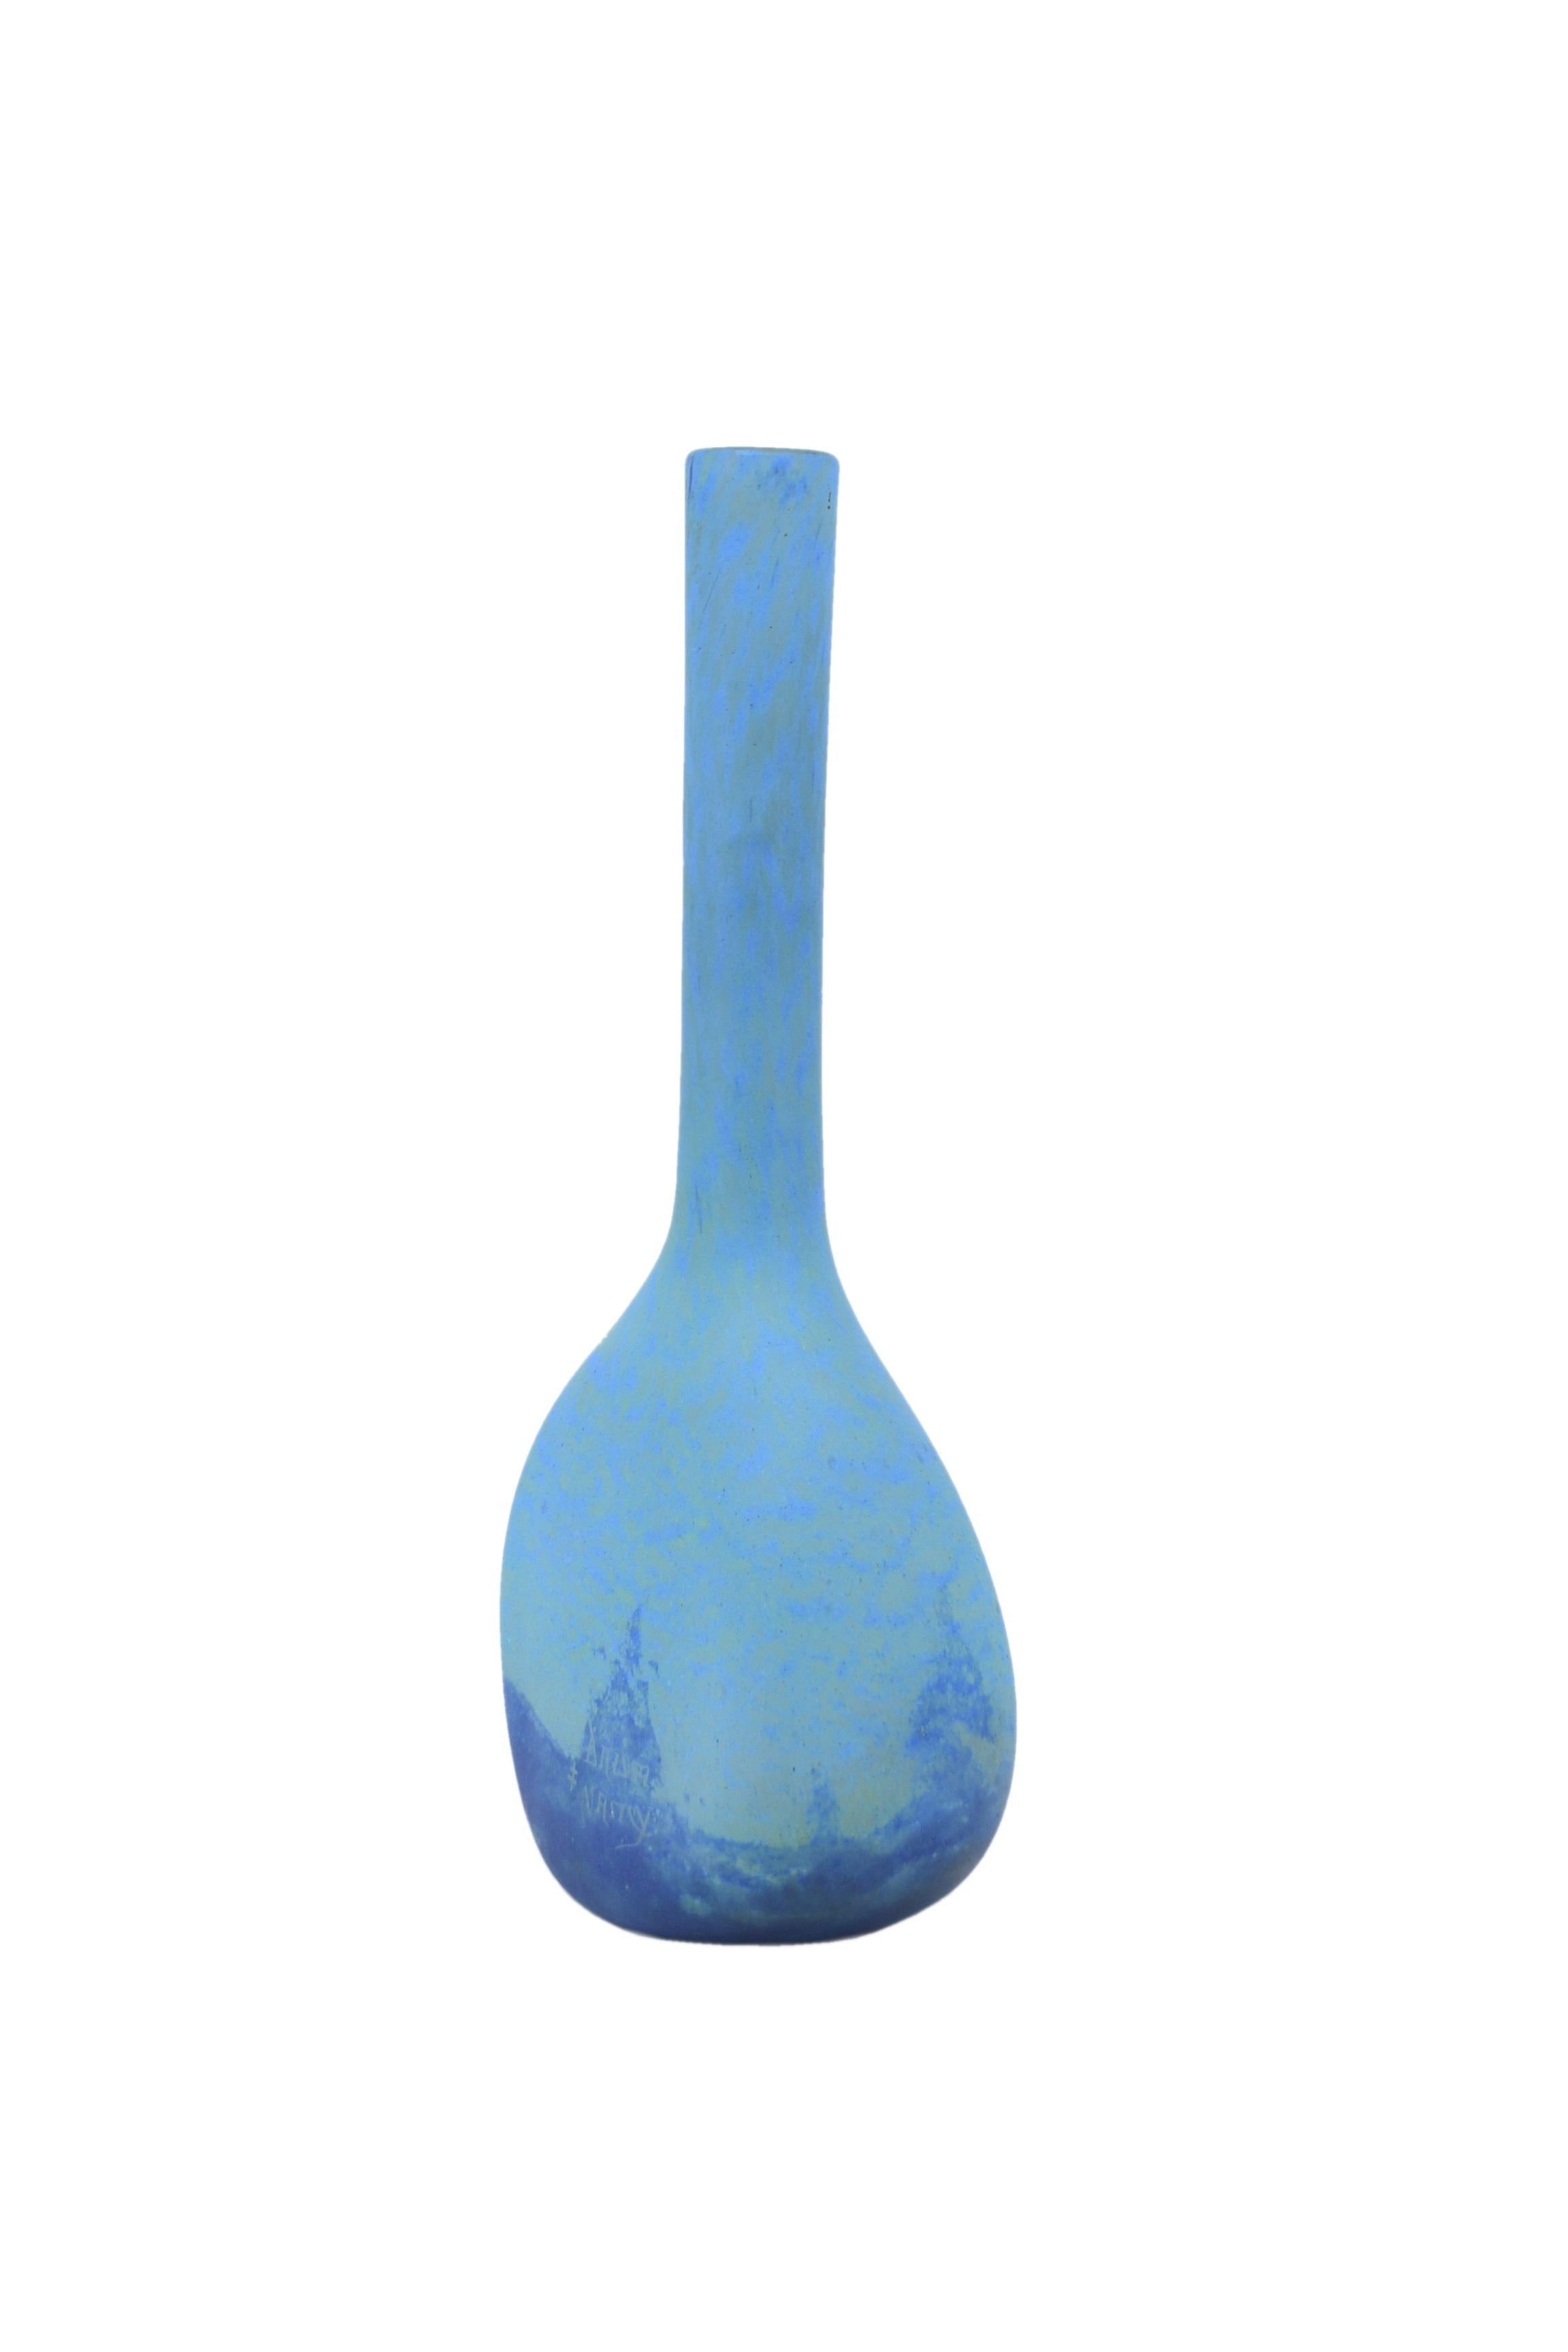 From the DAUM house in Nancy, a large vase with a long neck and belly made of blue Marmoreal blown glass with a very nice mountain and cloudy effect.
The vase is signed “Daum Nancy” with the cross of Lorraine.

Period: circa